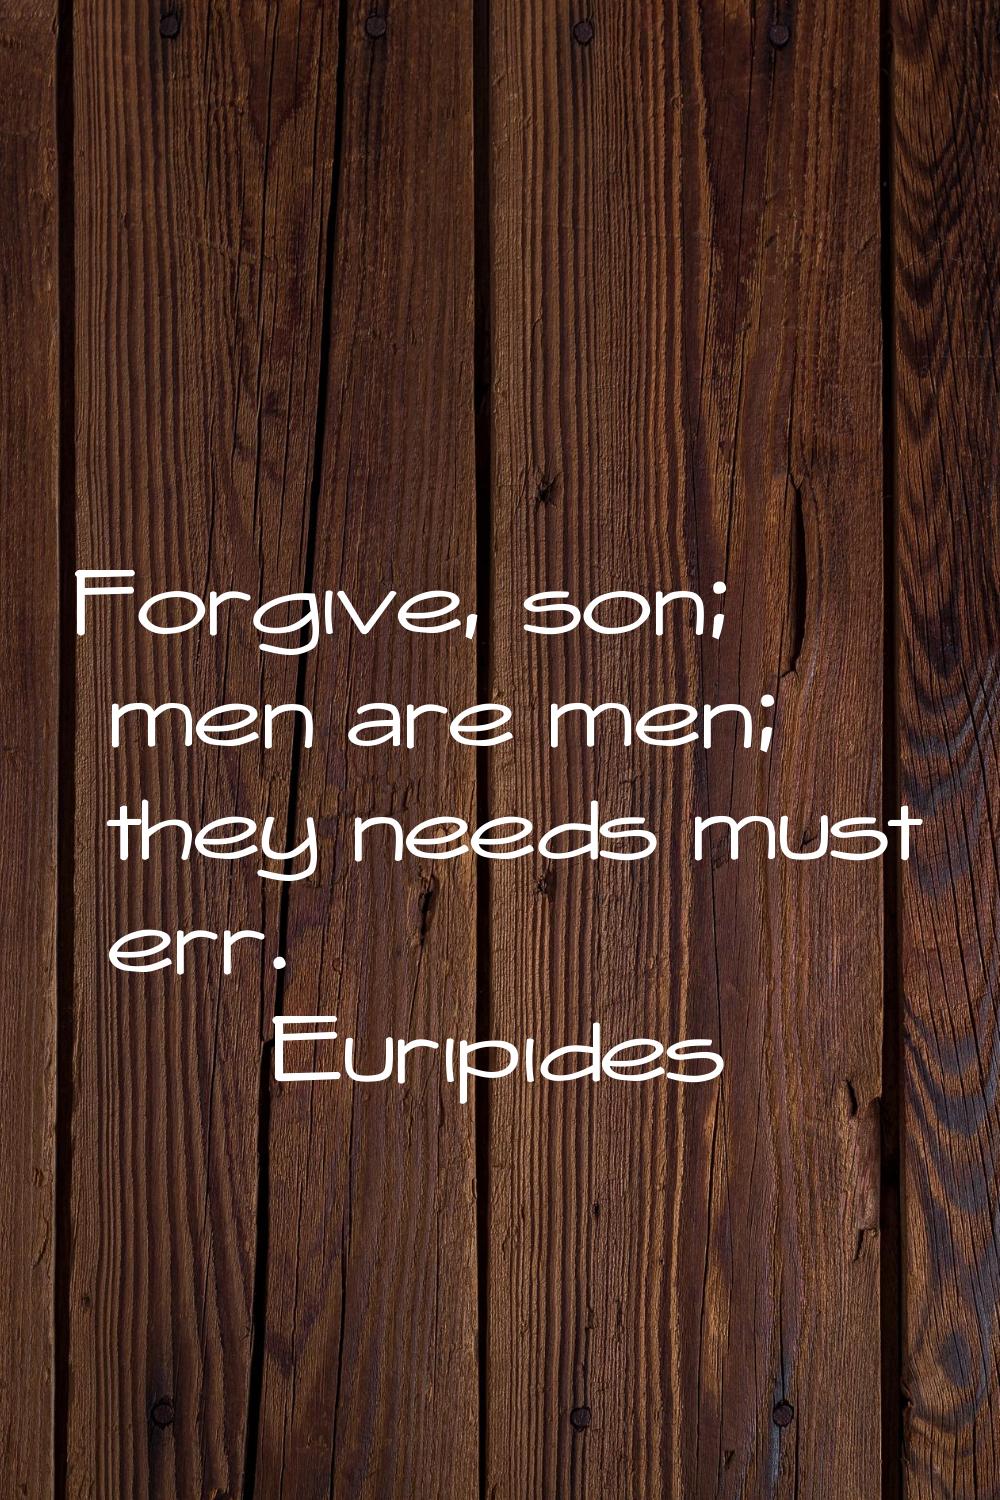 Forgive, son; men are men; they needs must err.